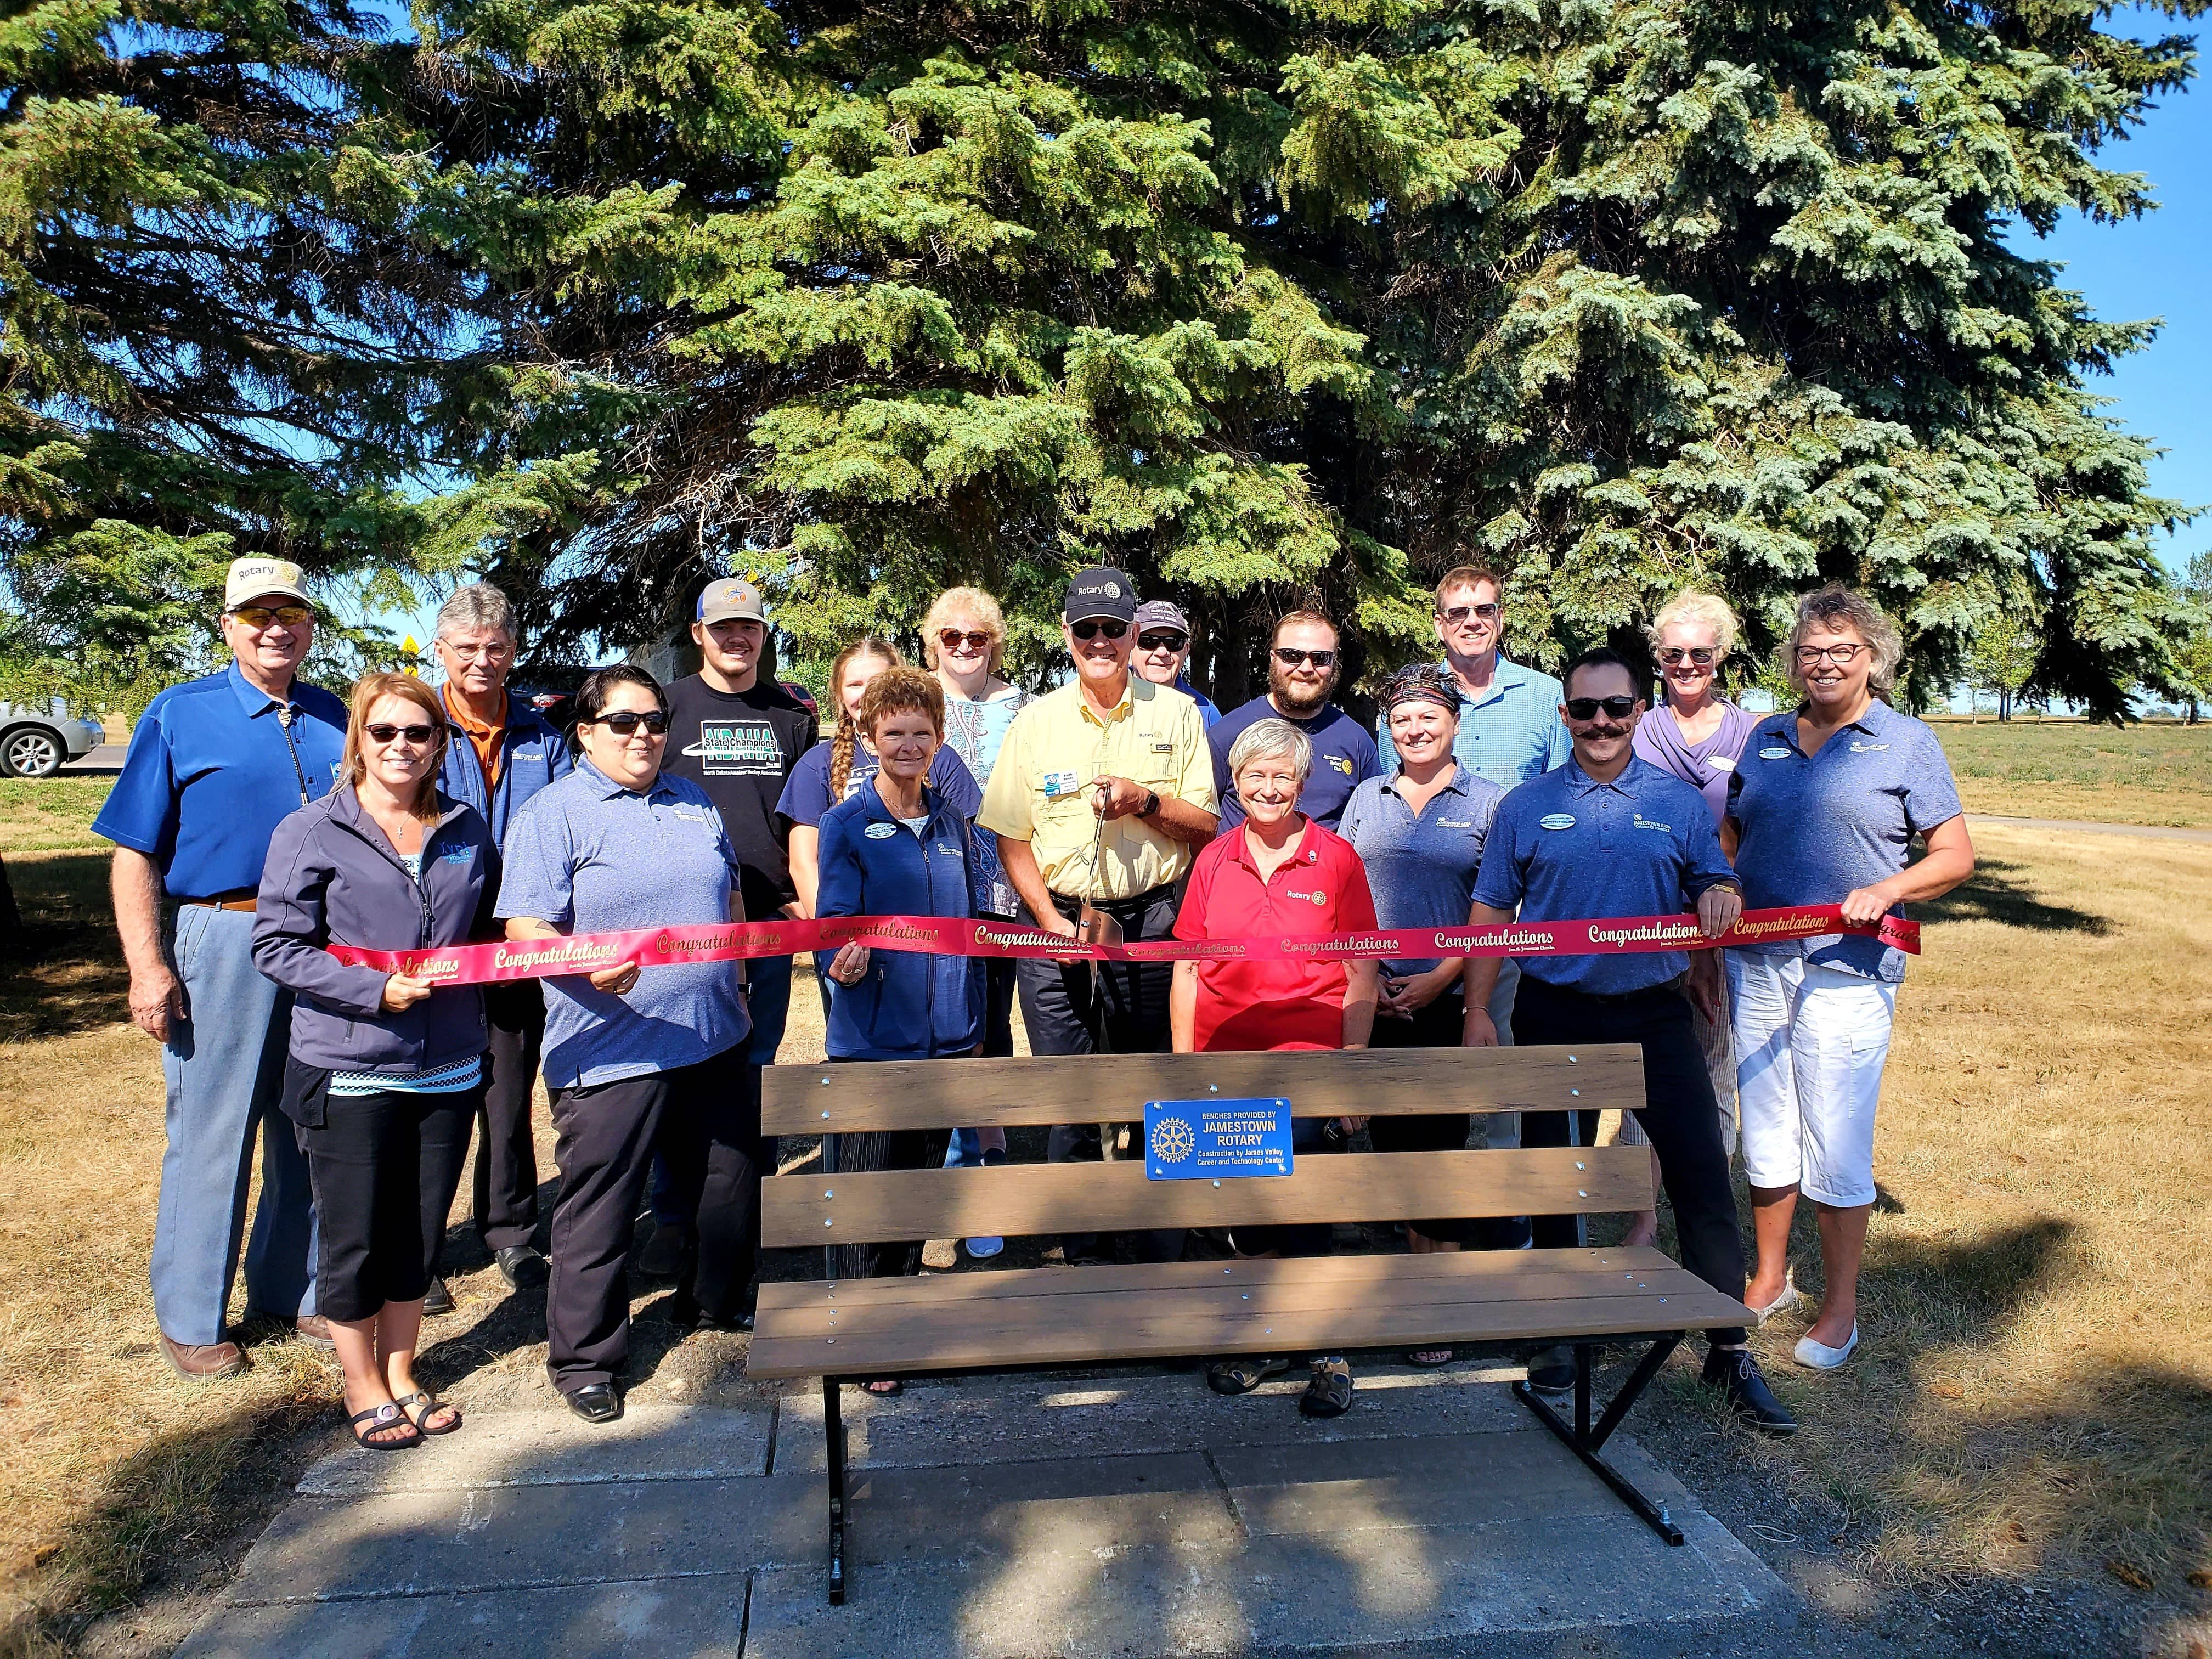 ribbon-cutting-rotary-benches